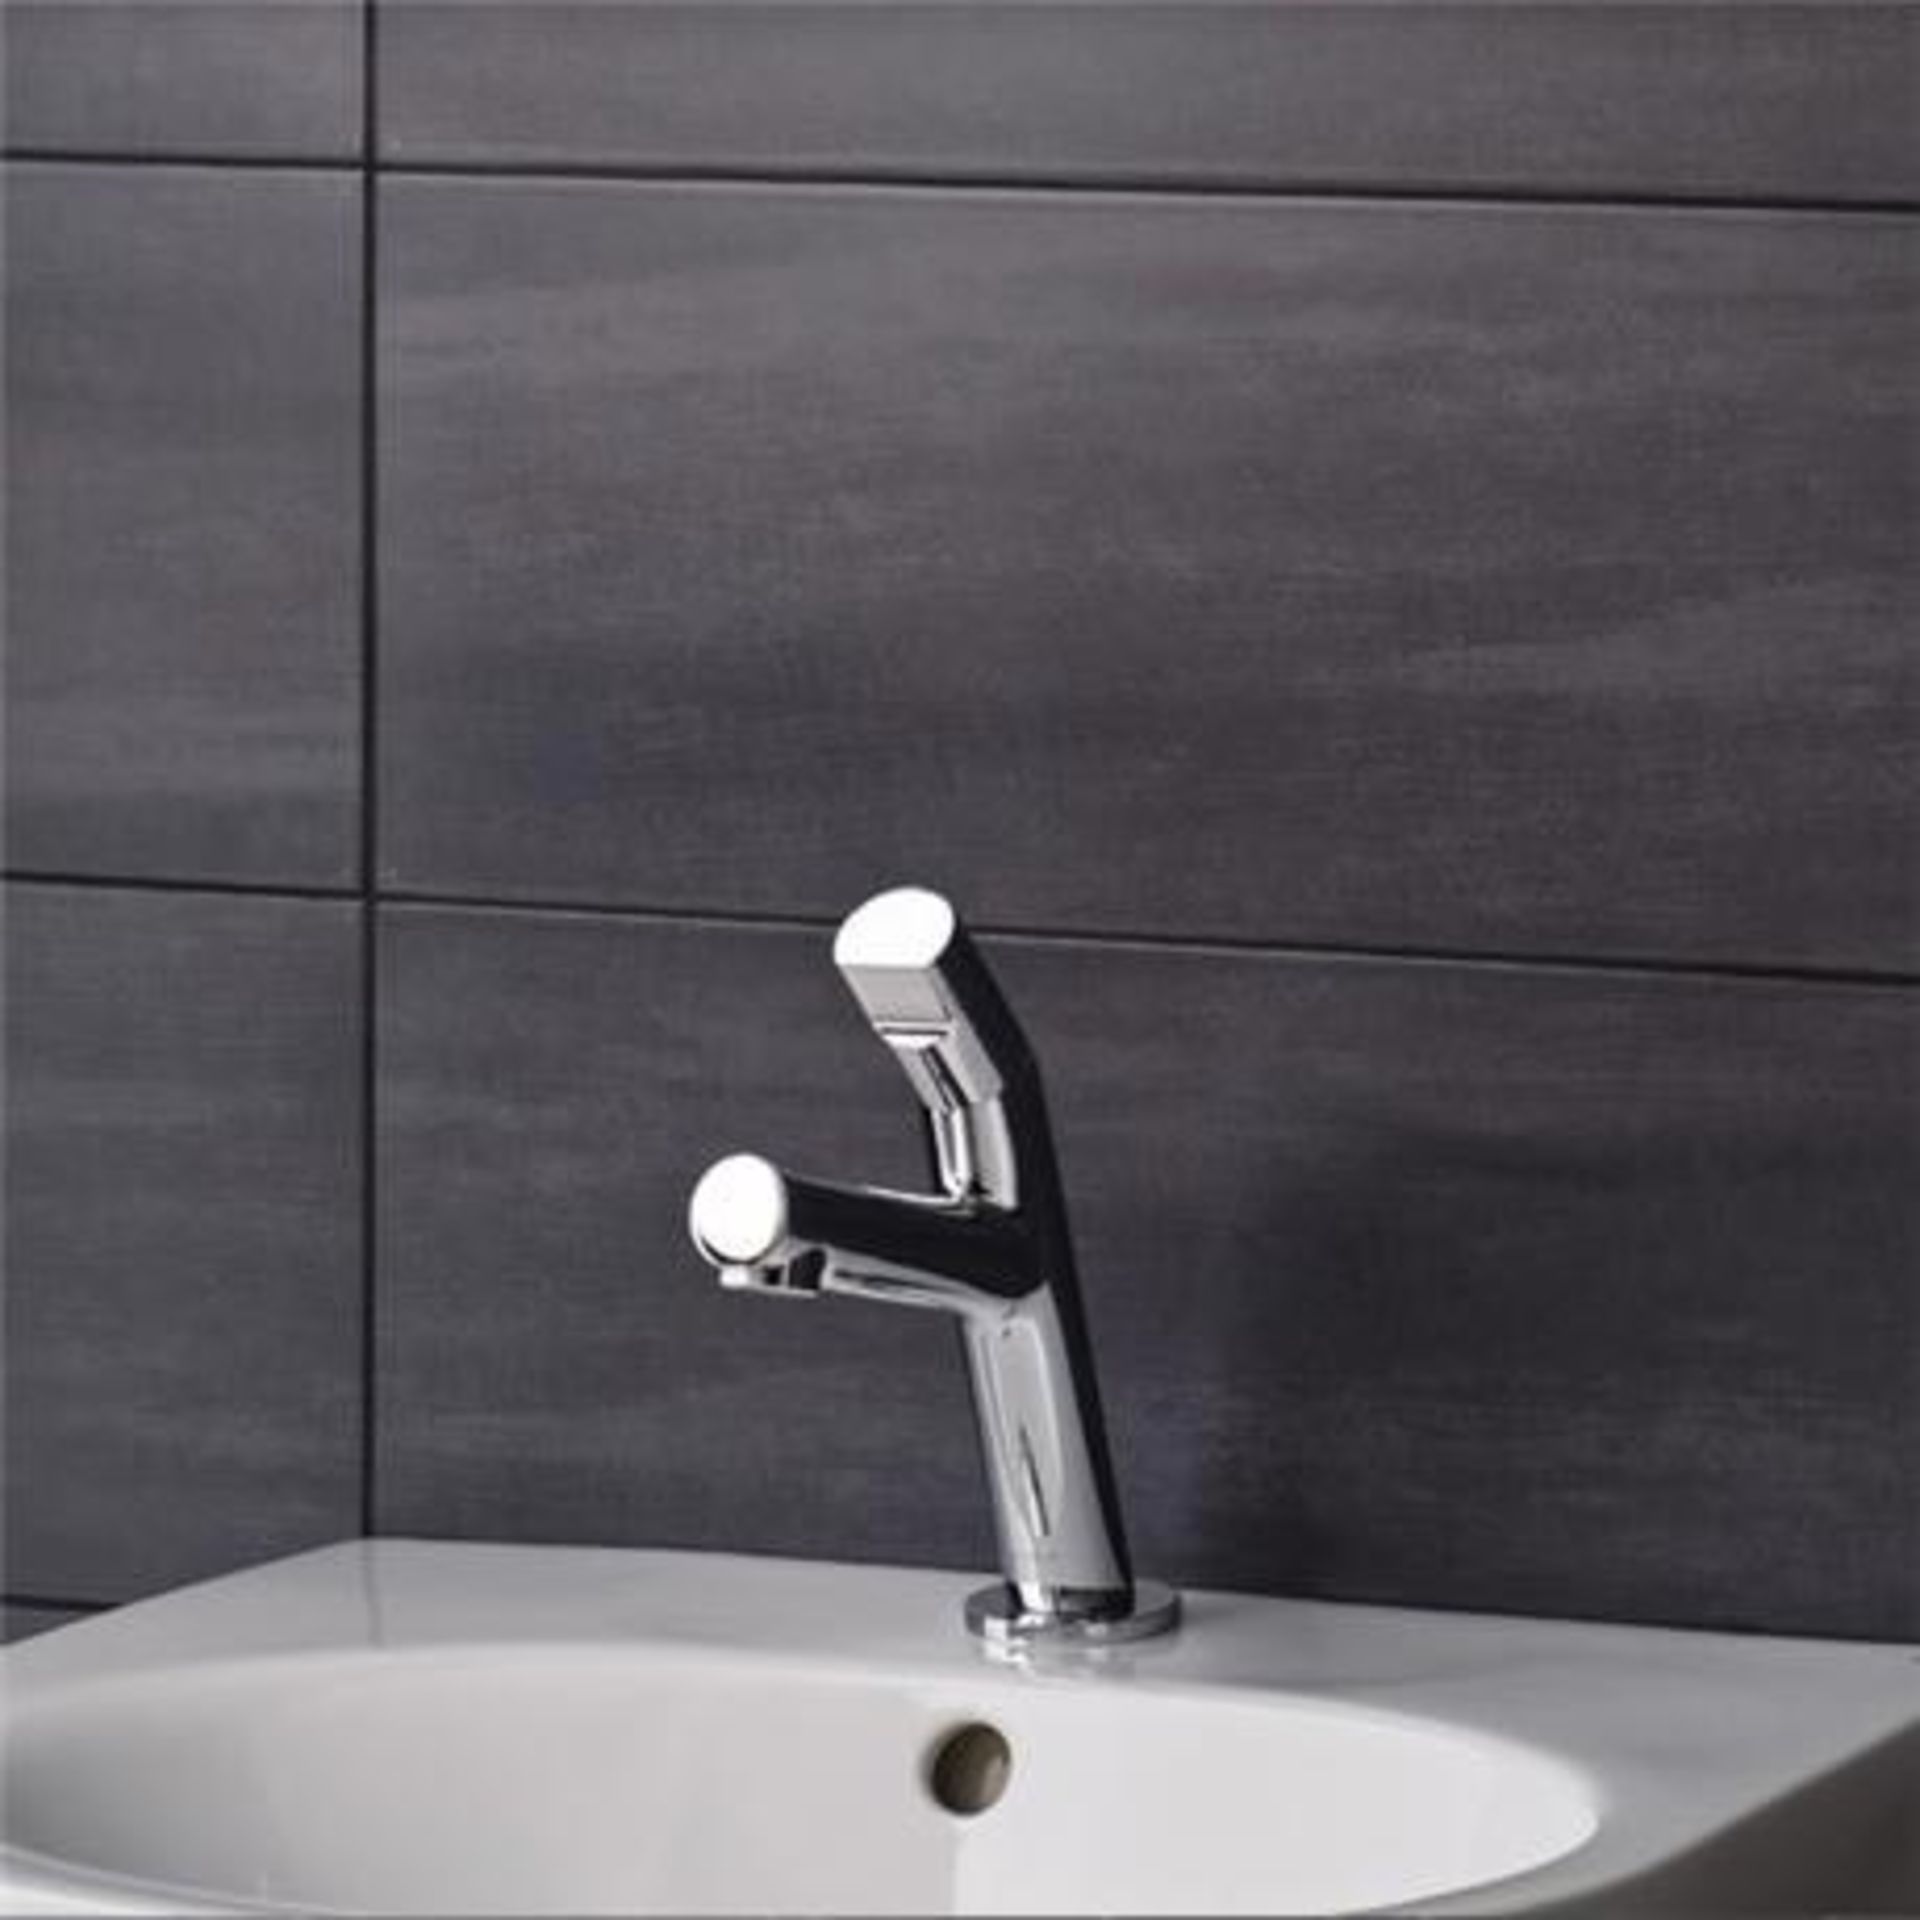 6 x Boxes of RAK Porcelain Floor or Wall Tiles - Dolomit Black - 20 x 50 cm - A Total of 8.4 m² - Image 8 of 9